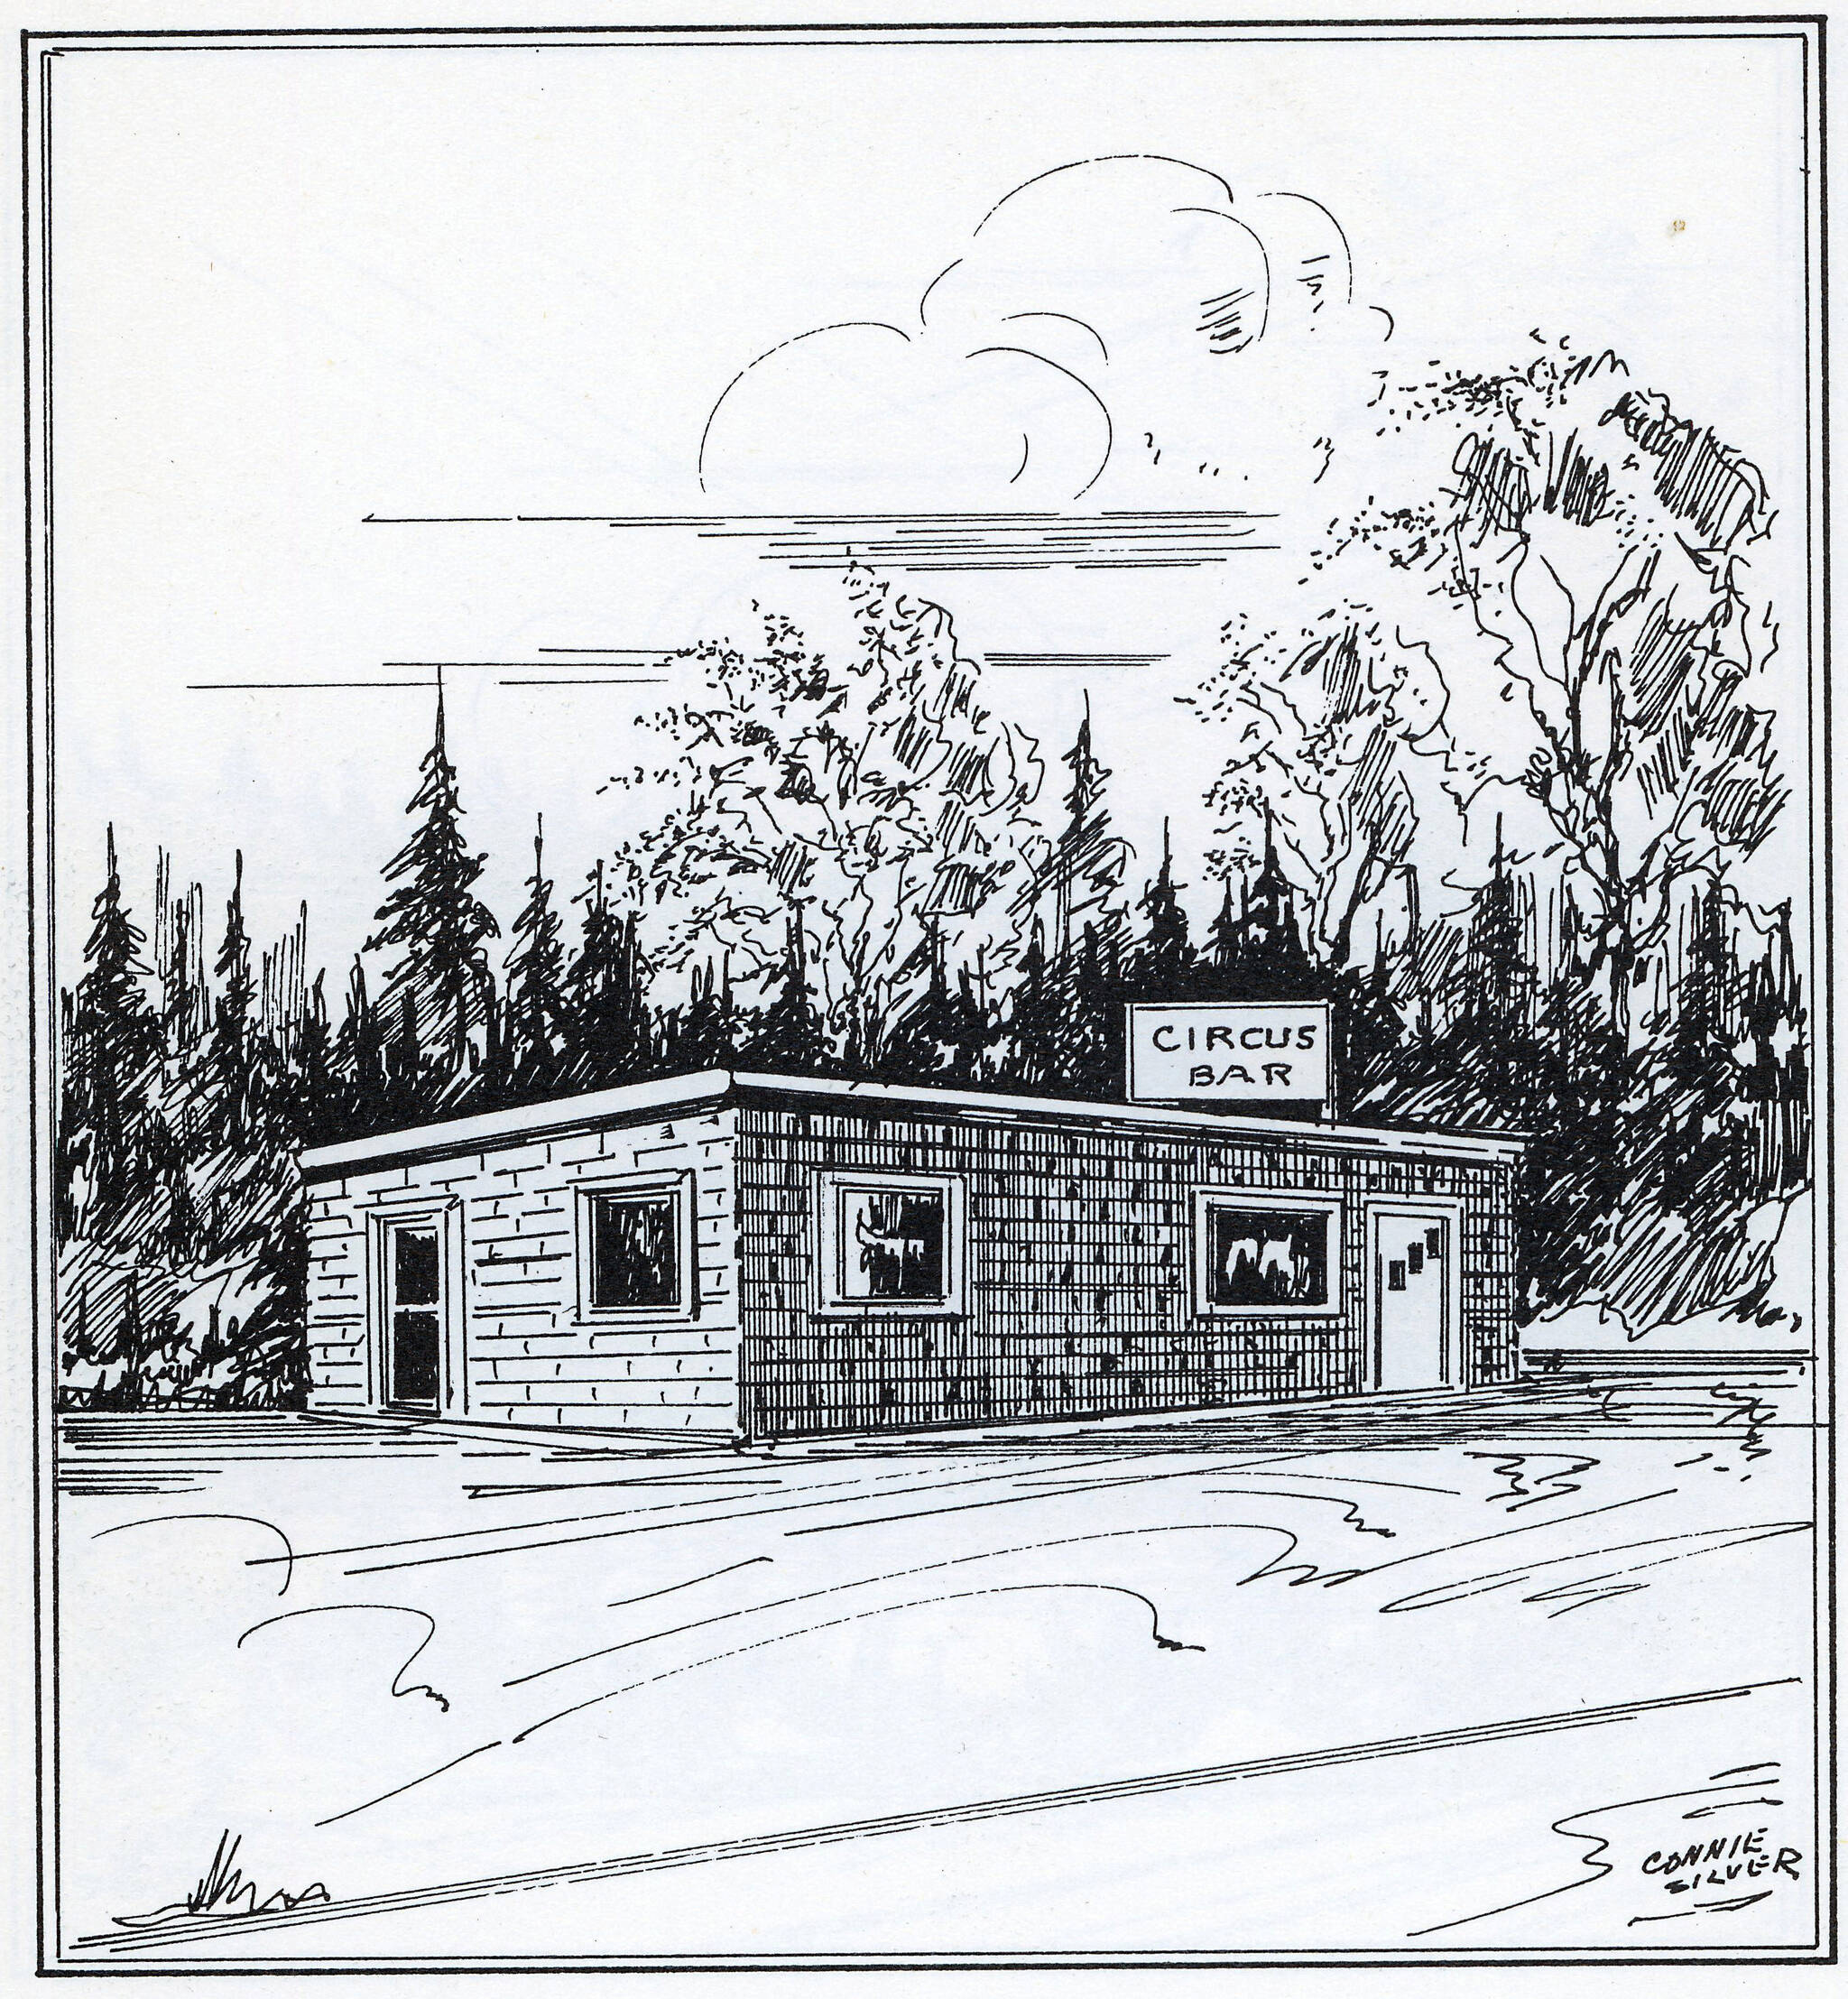 This 1961 drawing of the Circus Bar, east of Soldotna, was created by Connie Silver for a travel guide called Alaska Highway Sketches. The bar was located across the Sterling Highway from land that was later developed into the Birch Ridge Golf Course.